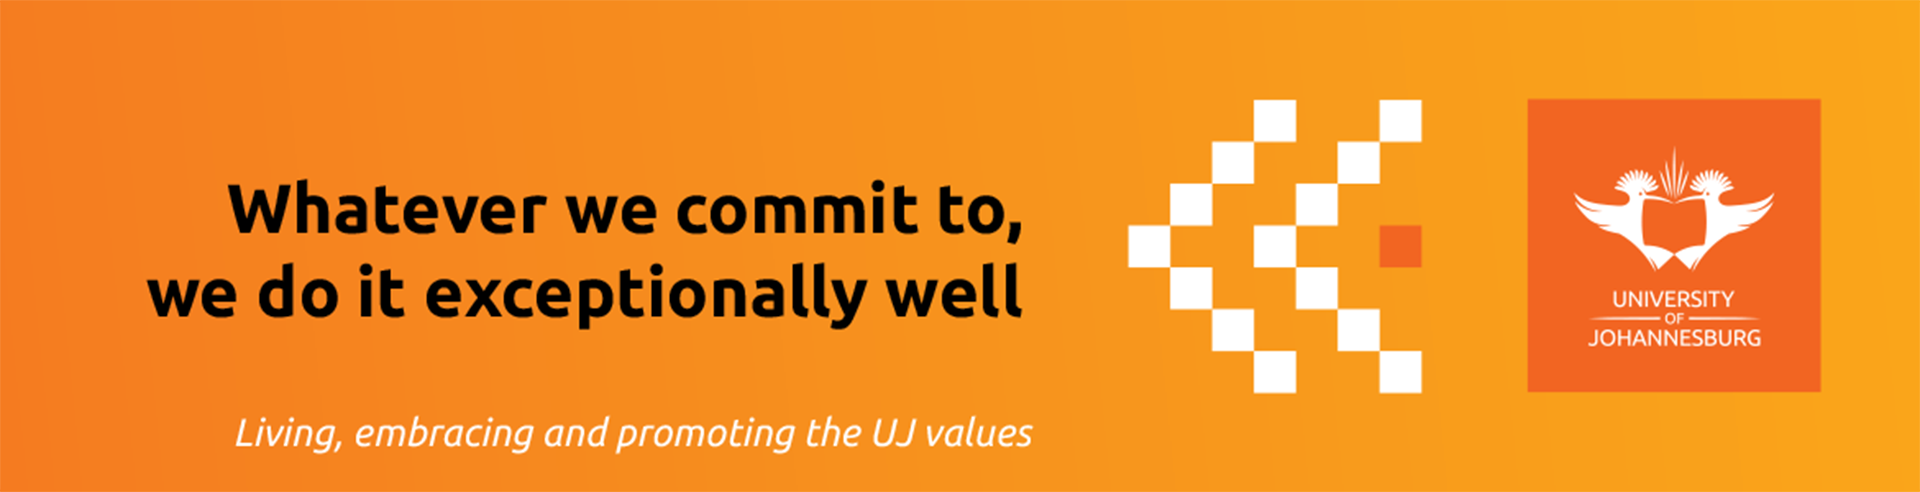 Uj Values Expressions Posters 2020 Ulink 1170x300mm 27